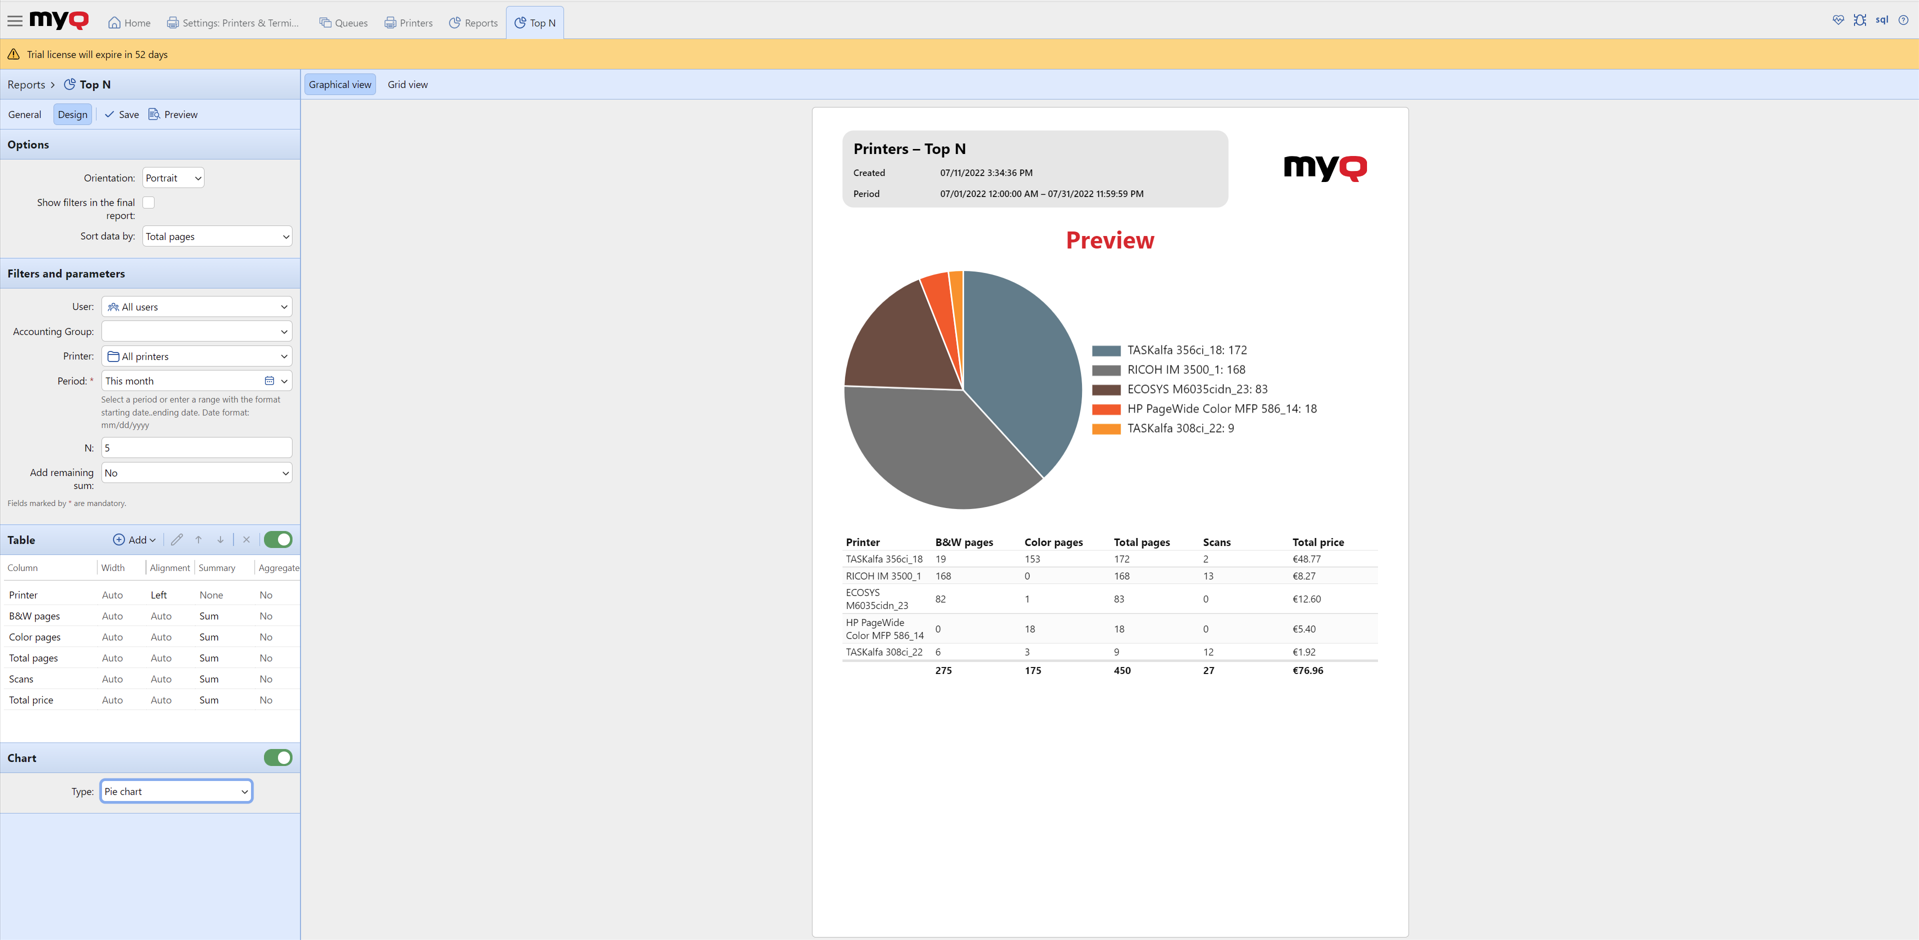 MyQ X Software - Web admin panel of MyQ X showing a pie graph preview of connected MFDs on the network and a summary of recent actions such as B&W prints, scans, and costs.